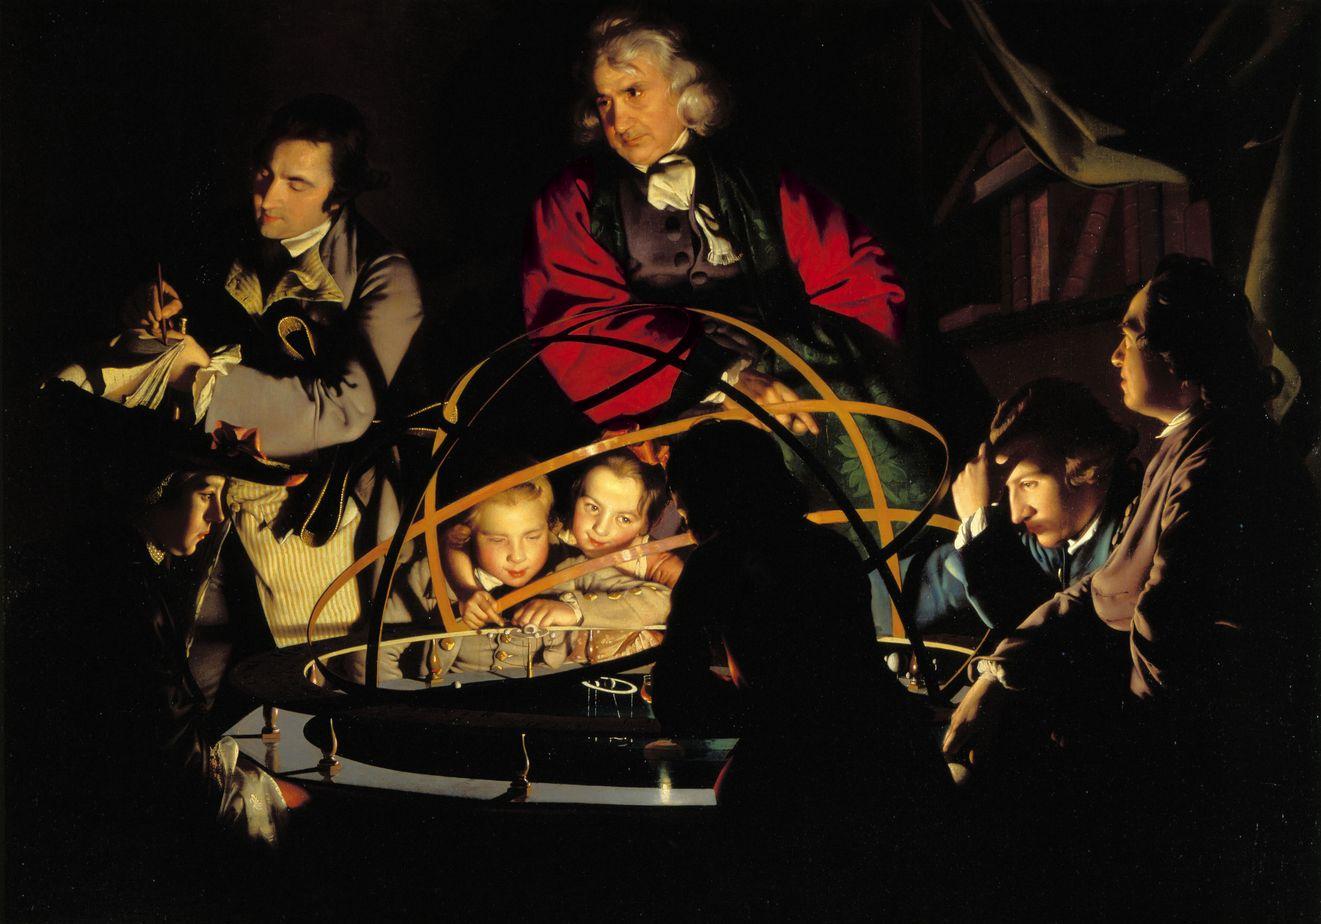 Joseph Wright of Derby, A Philosopher Giving A Lecture at the Orrery, c. 1765, oil on canvas